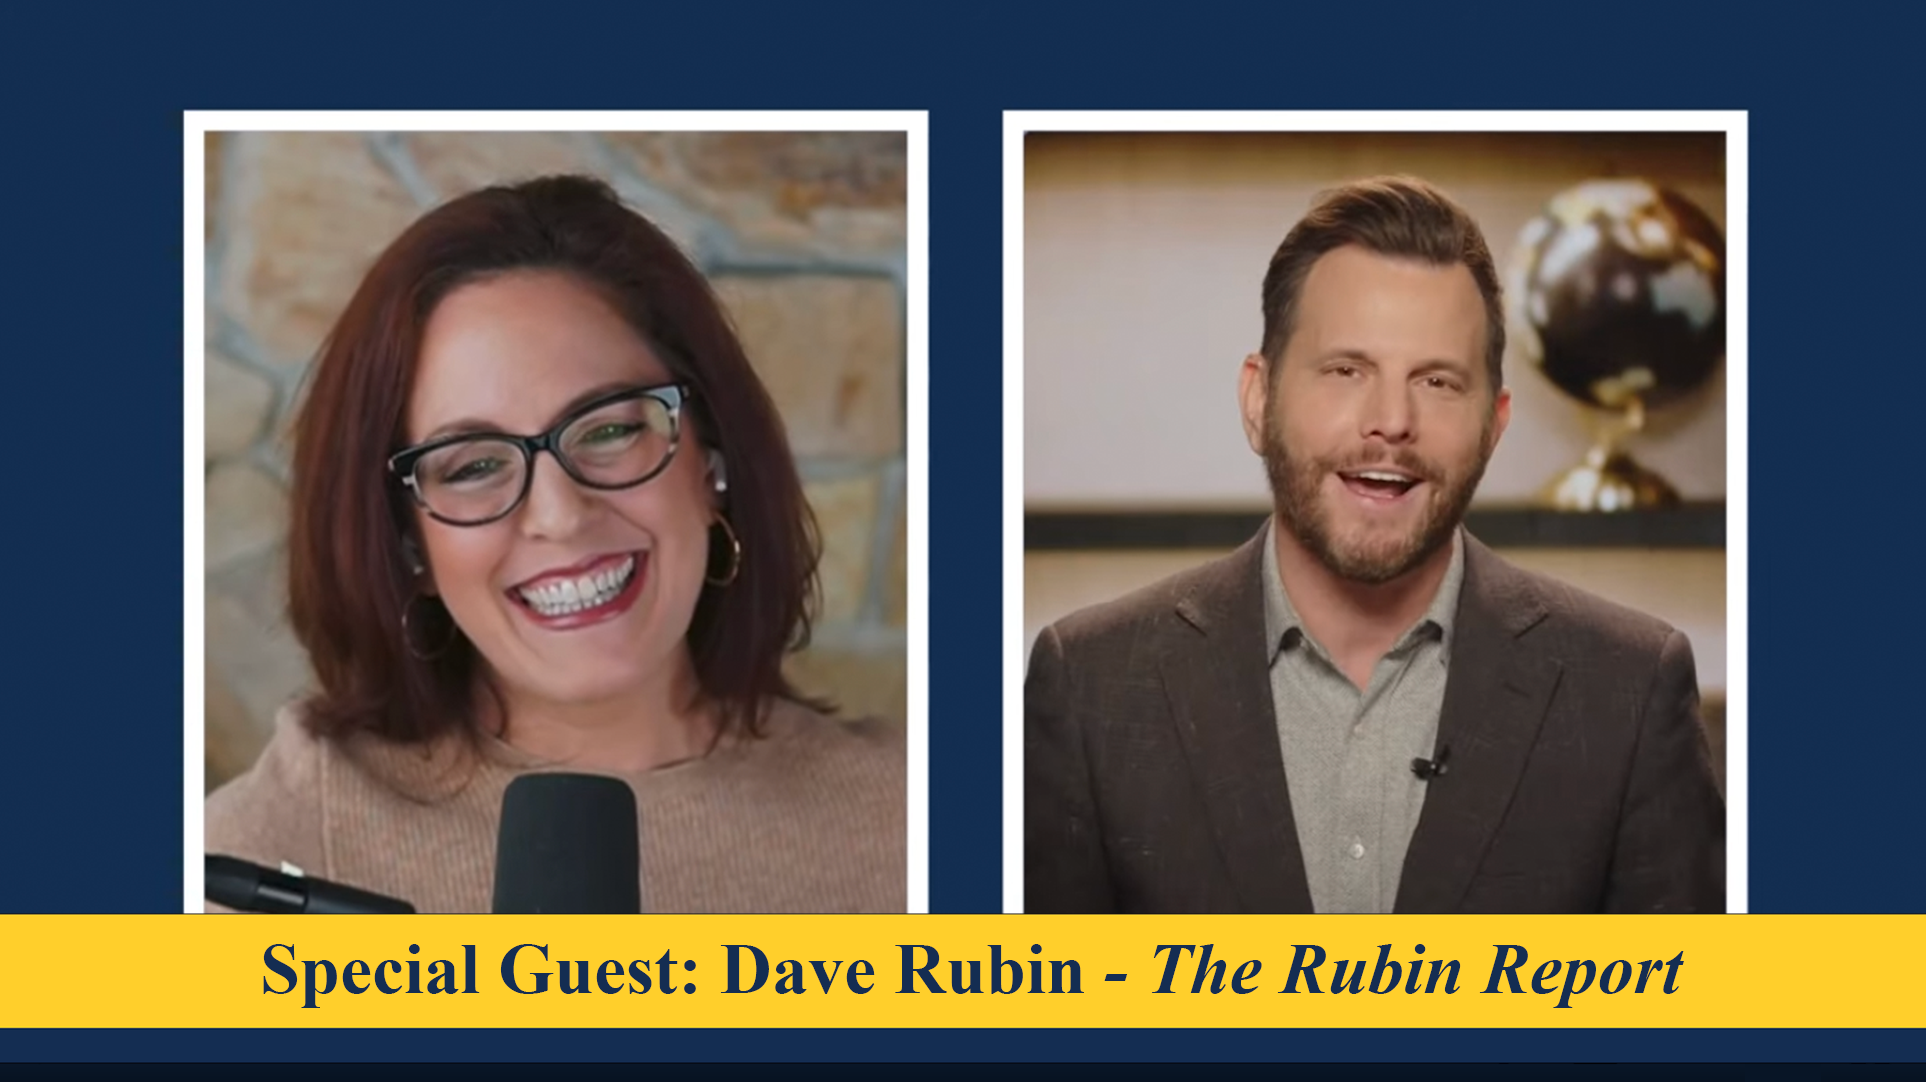 California vs. Florida, Parental Rights, and the Dangers of Gender Ideology, with Dave Rubin